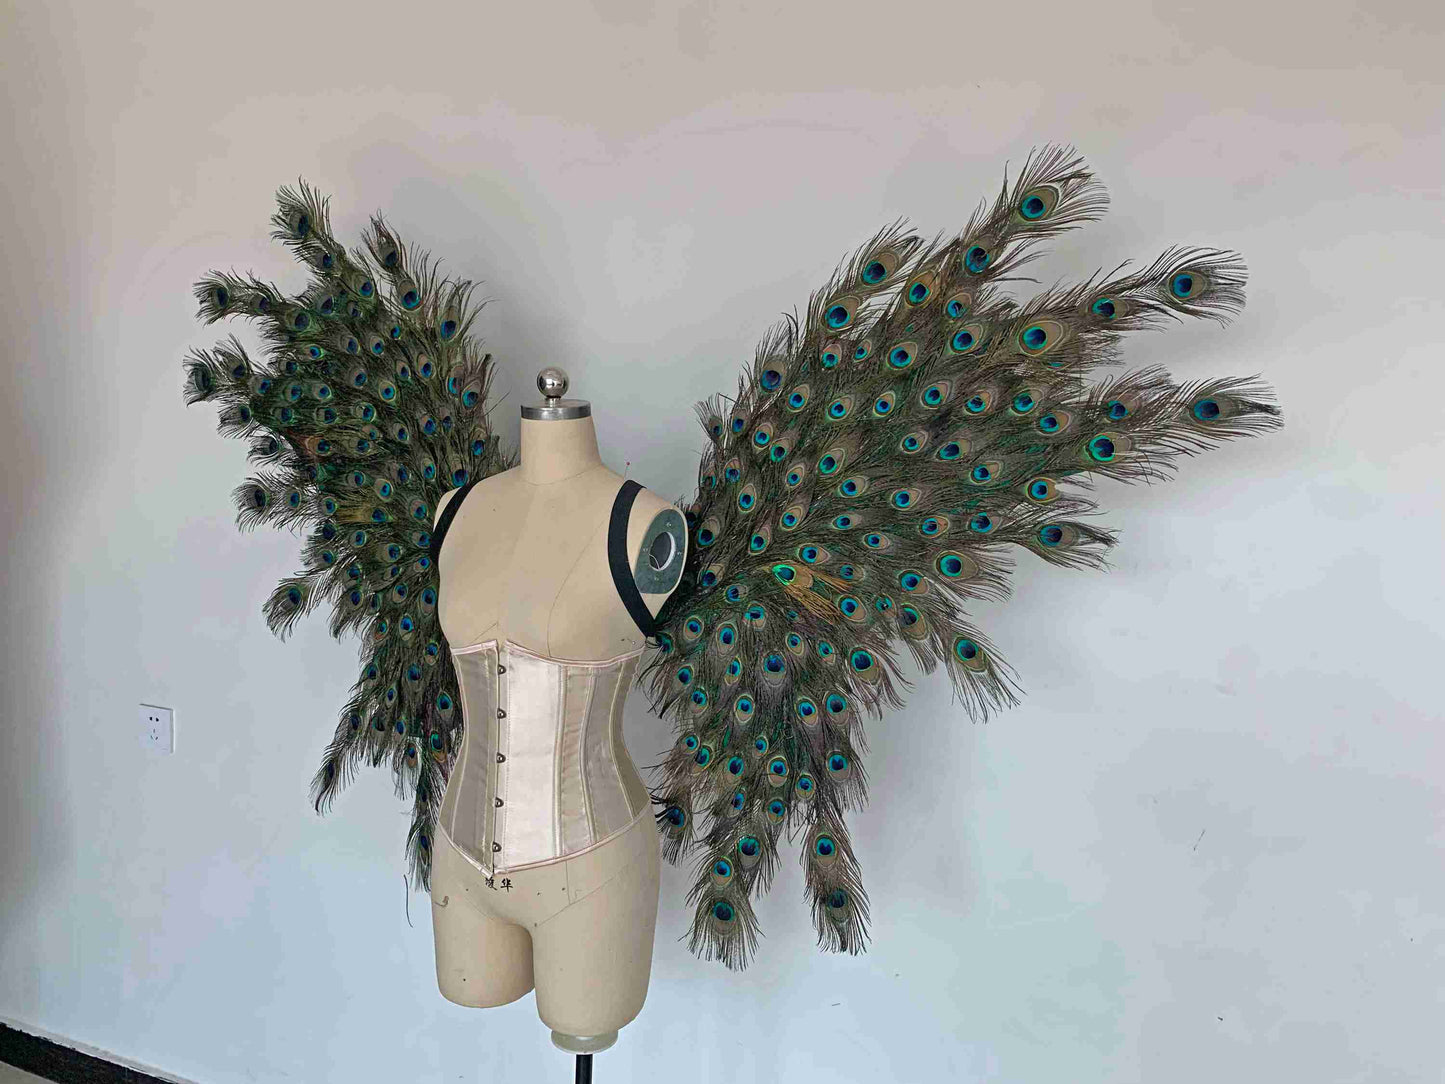 Our angel wings from the left side. Made from peacock feathers. Wings for peacock costume or fantasy costume. Suitable for photoshoots.